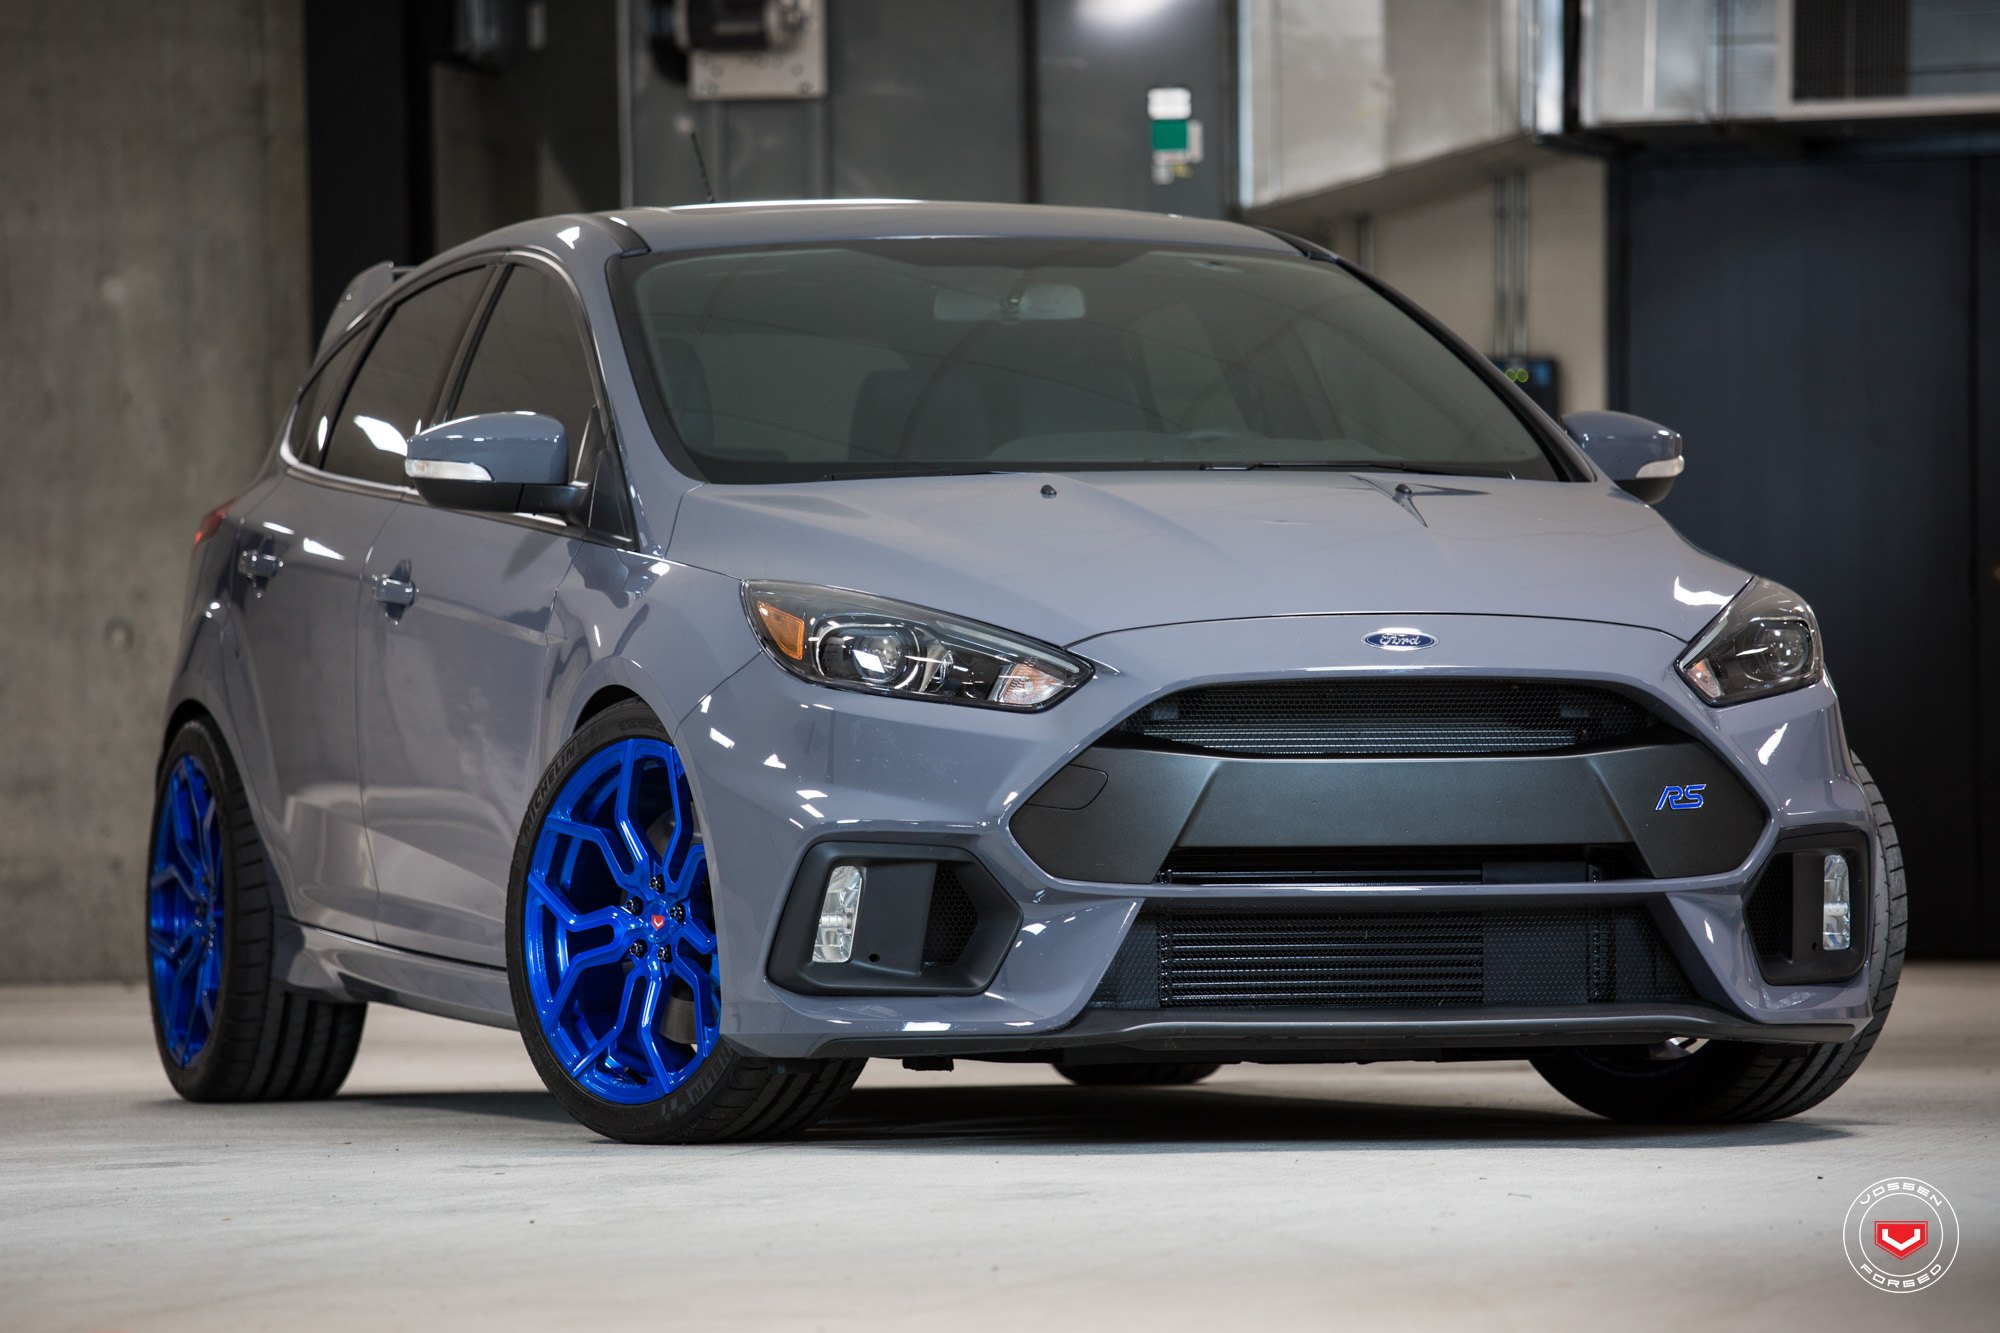 Custom Front Bumper on Gray Ford Focus RS - Photo by Vossen